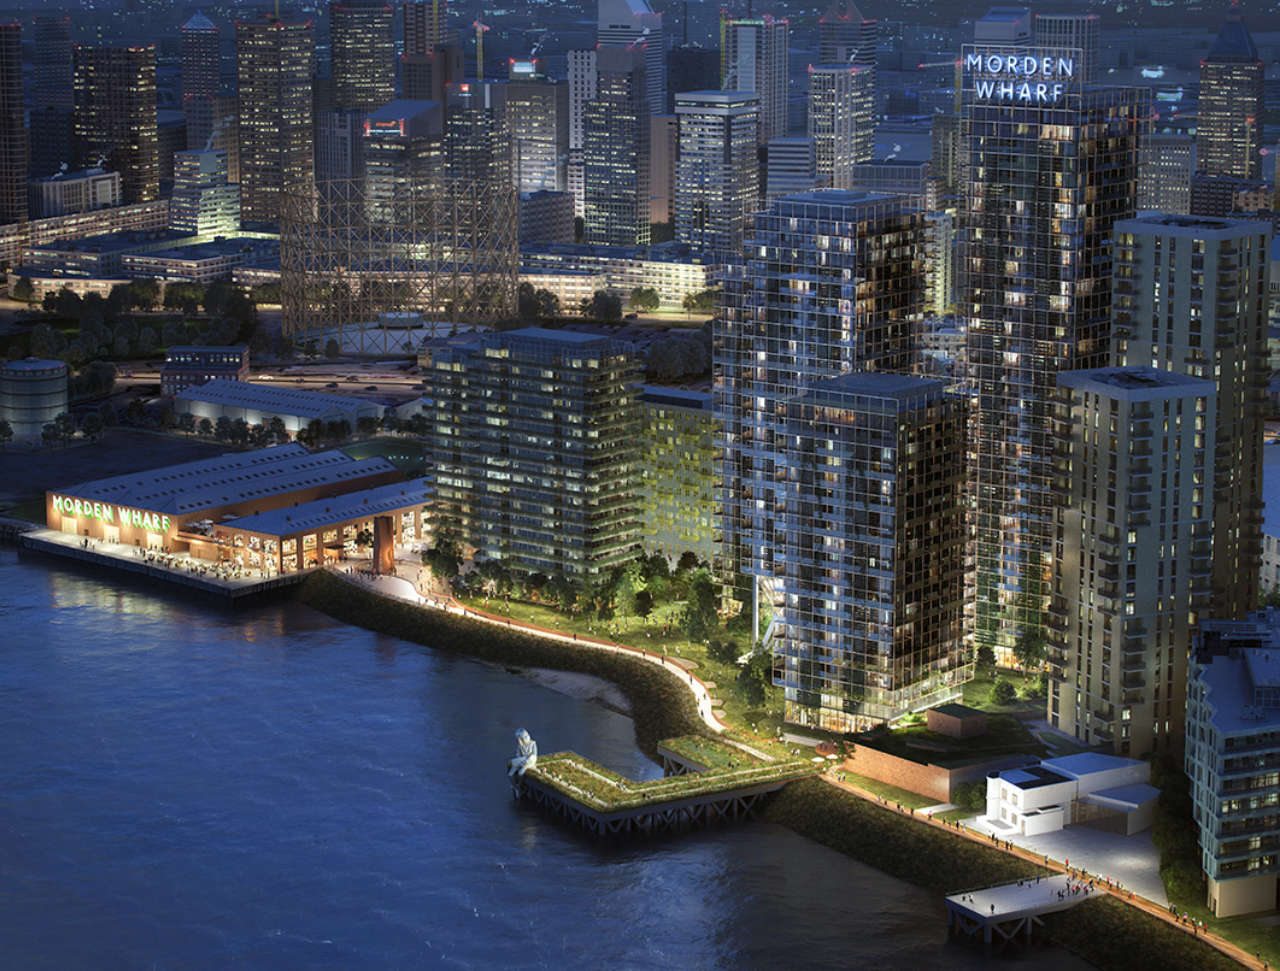 Morden Wharf as it is proposed to look.